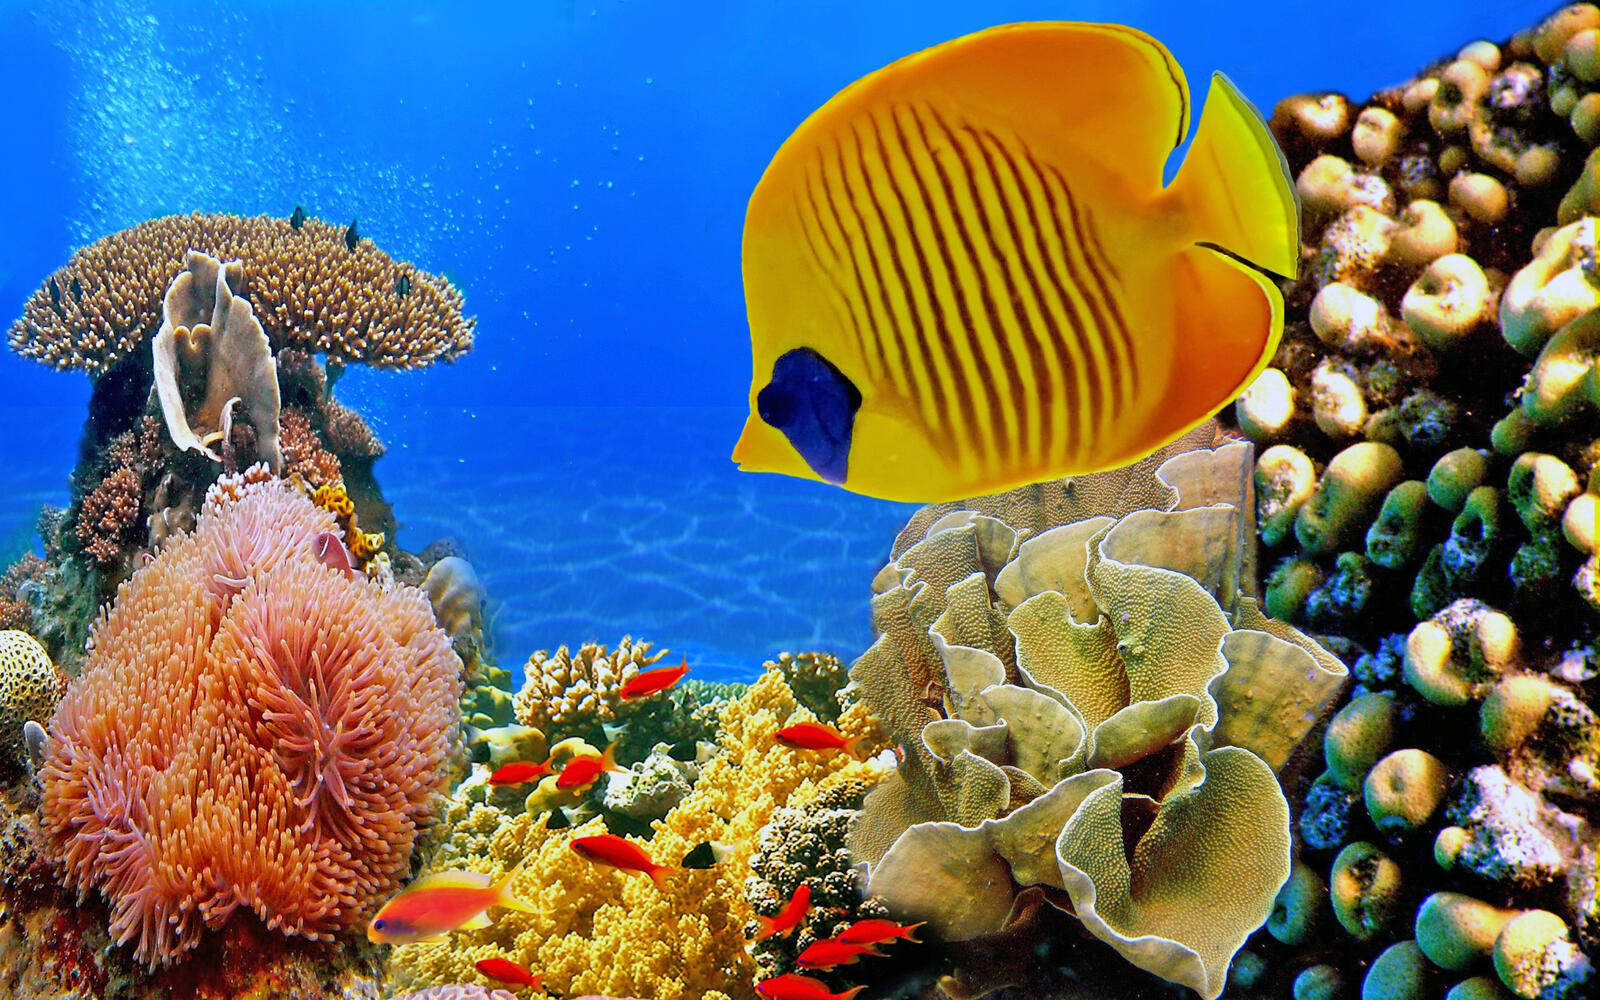 Wallpapers nature fish coral on the desktop